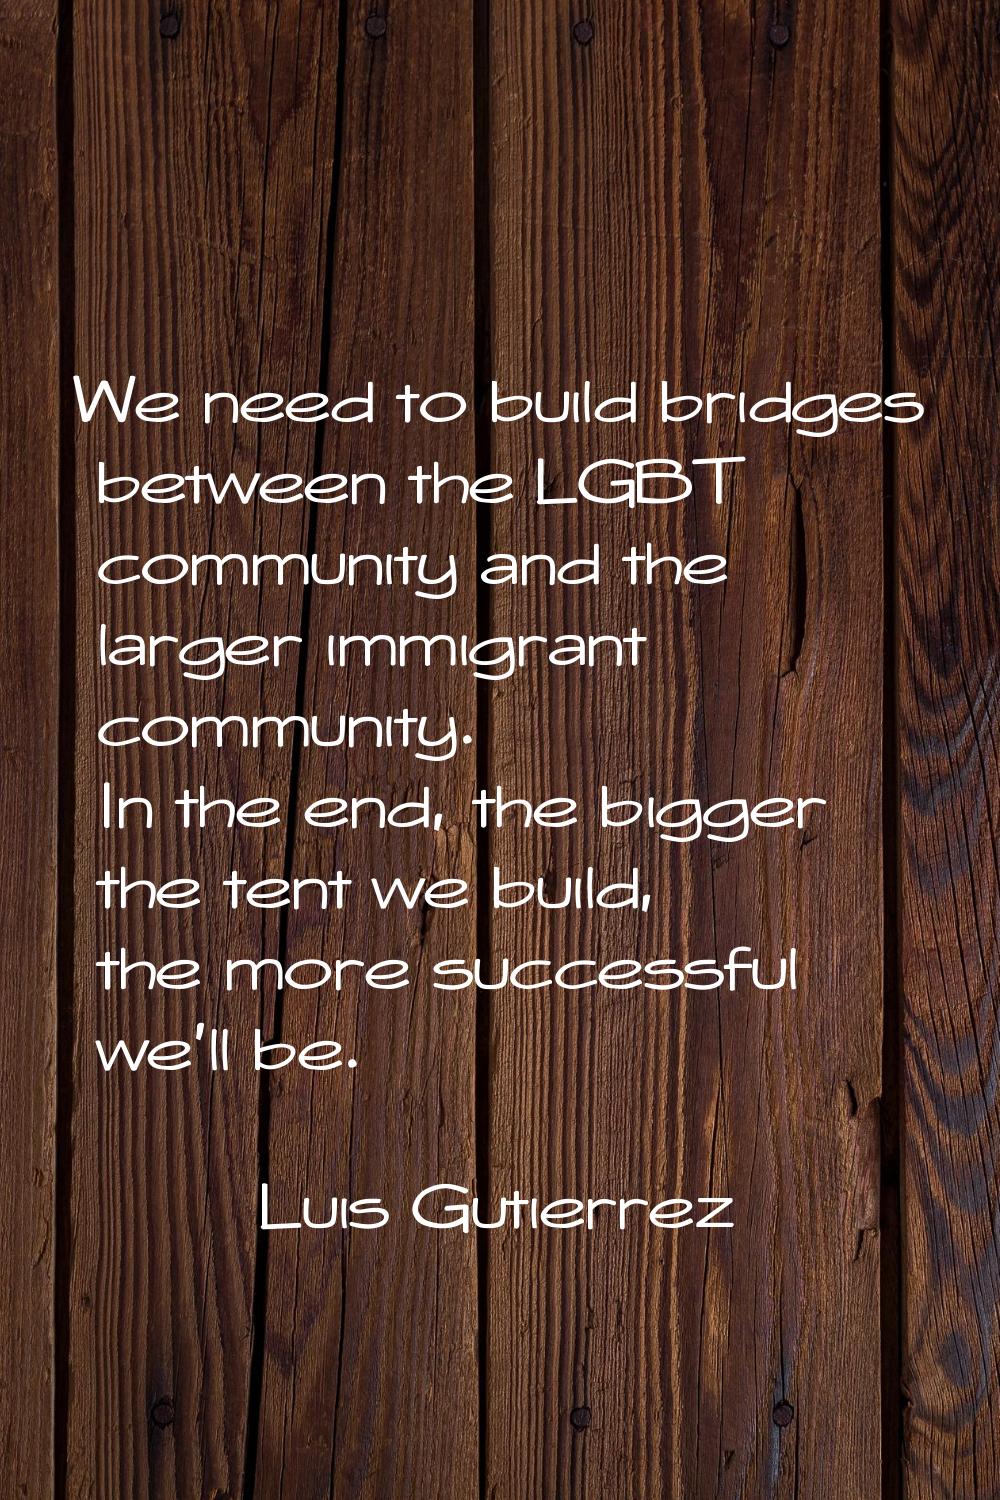 We need to build bridges between the LGBT community and the larger immigrant community. In the end,